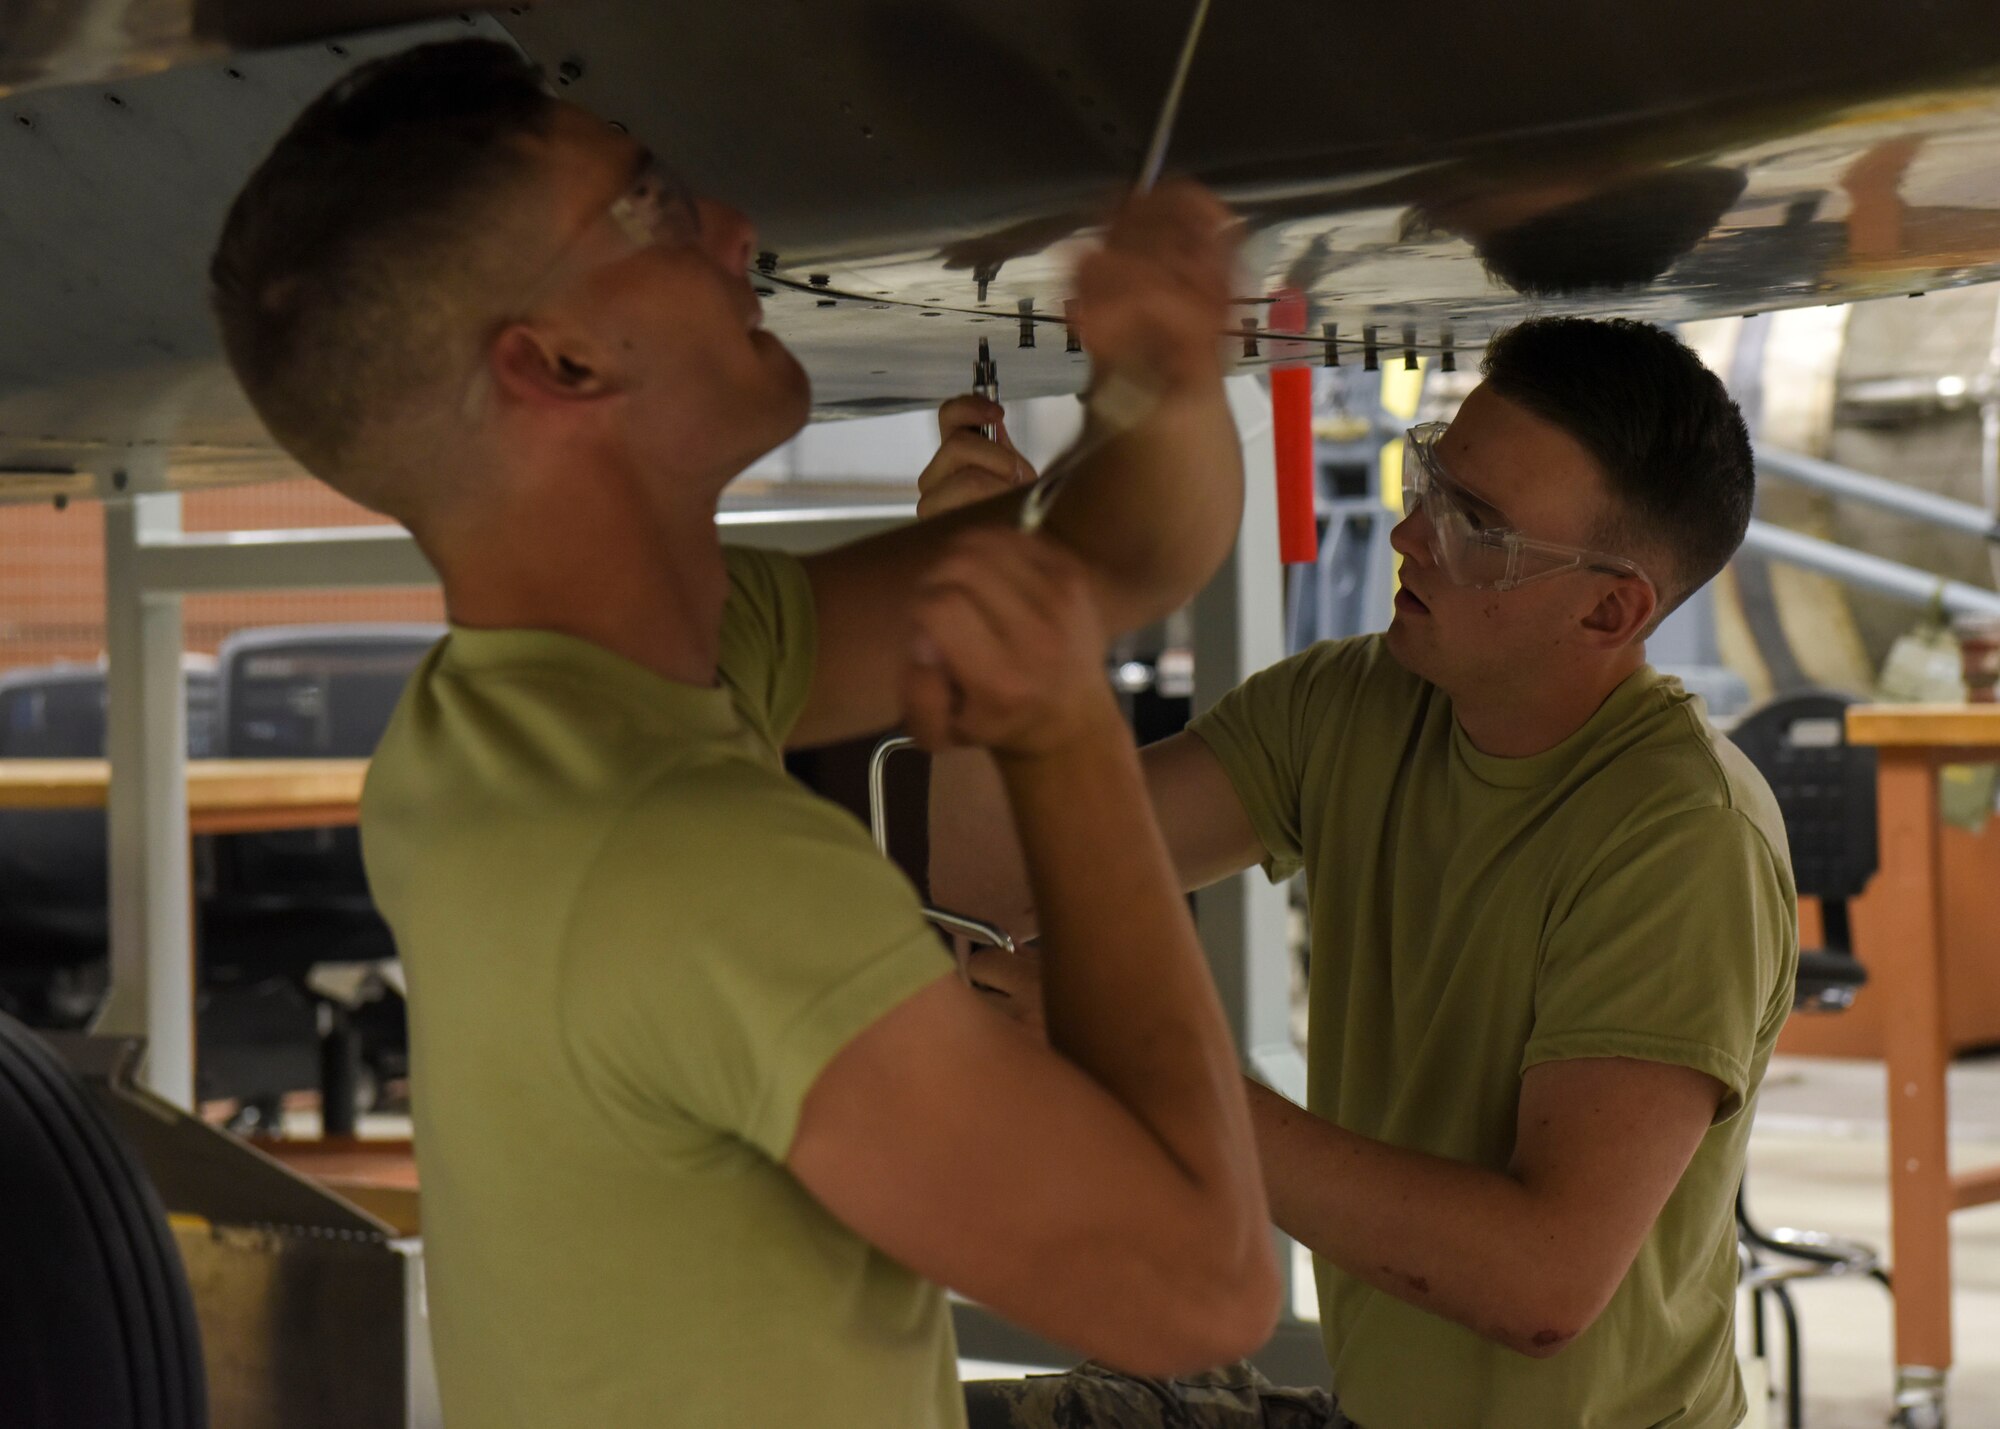 Airman 1st Class Daniel Hawkins (right), 361st Training Squadron aerospace propulsion apprentice, prepares a McDonnell Douglas F-15 Eagle for engine removal at Sheppard Air Force Base, Texas, Jun. 10, 2019. Hawkins, an ACE award recipient, received a score of 100% on all of his progress checks and block tests during his training course. Hawkins enjoys the challenges that along come with his job. (U.S. Air Force photo by Senior Airman Ilyana A. Escalona)